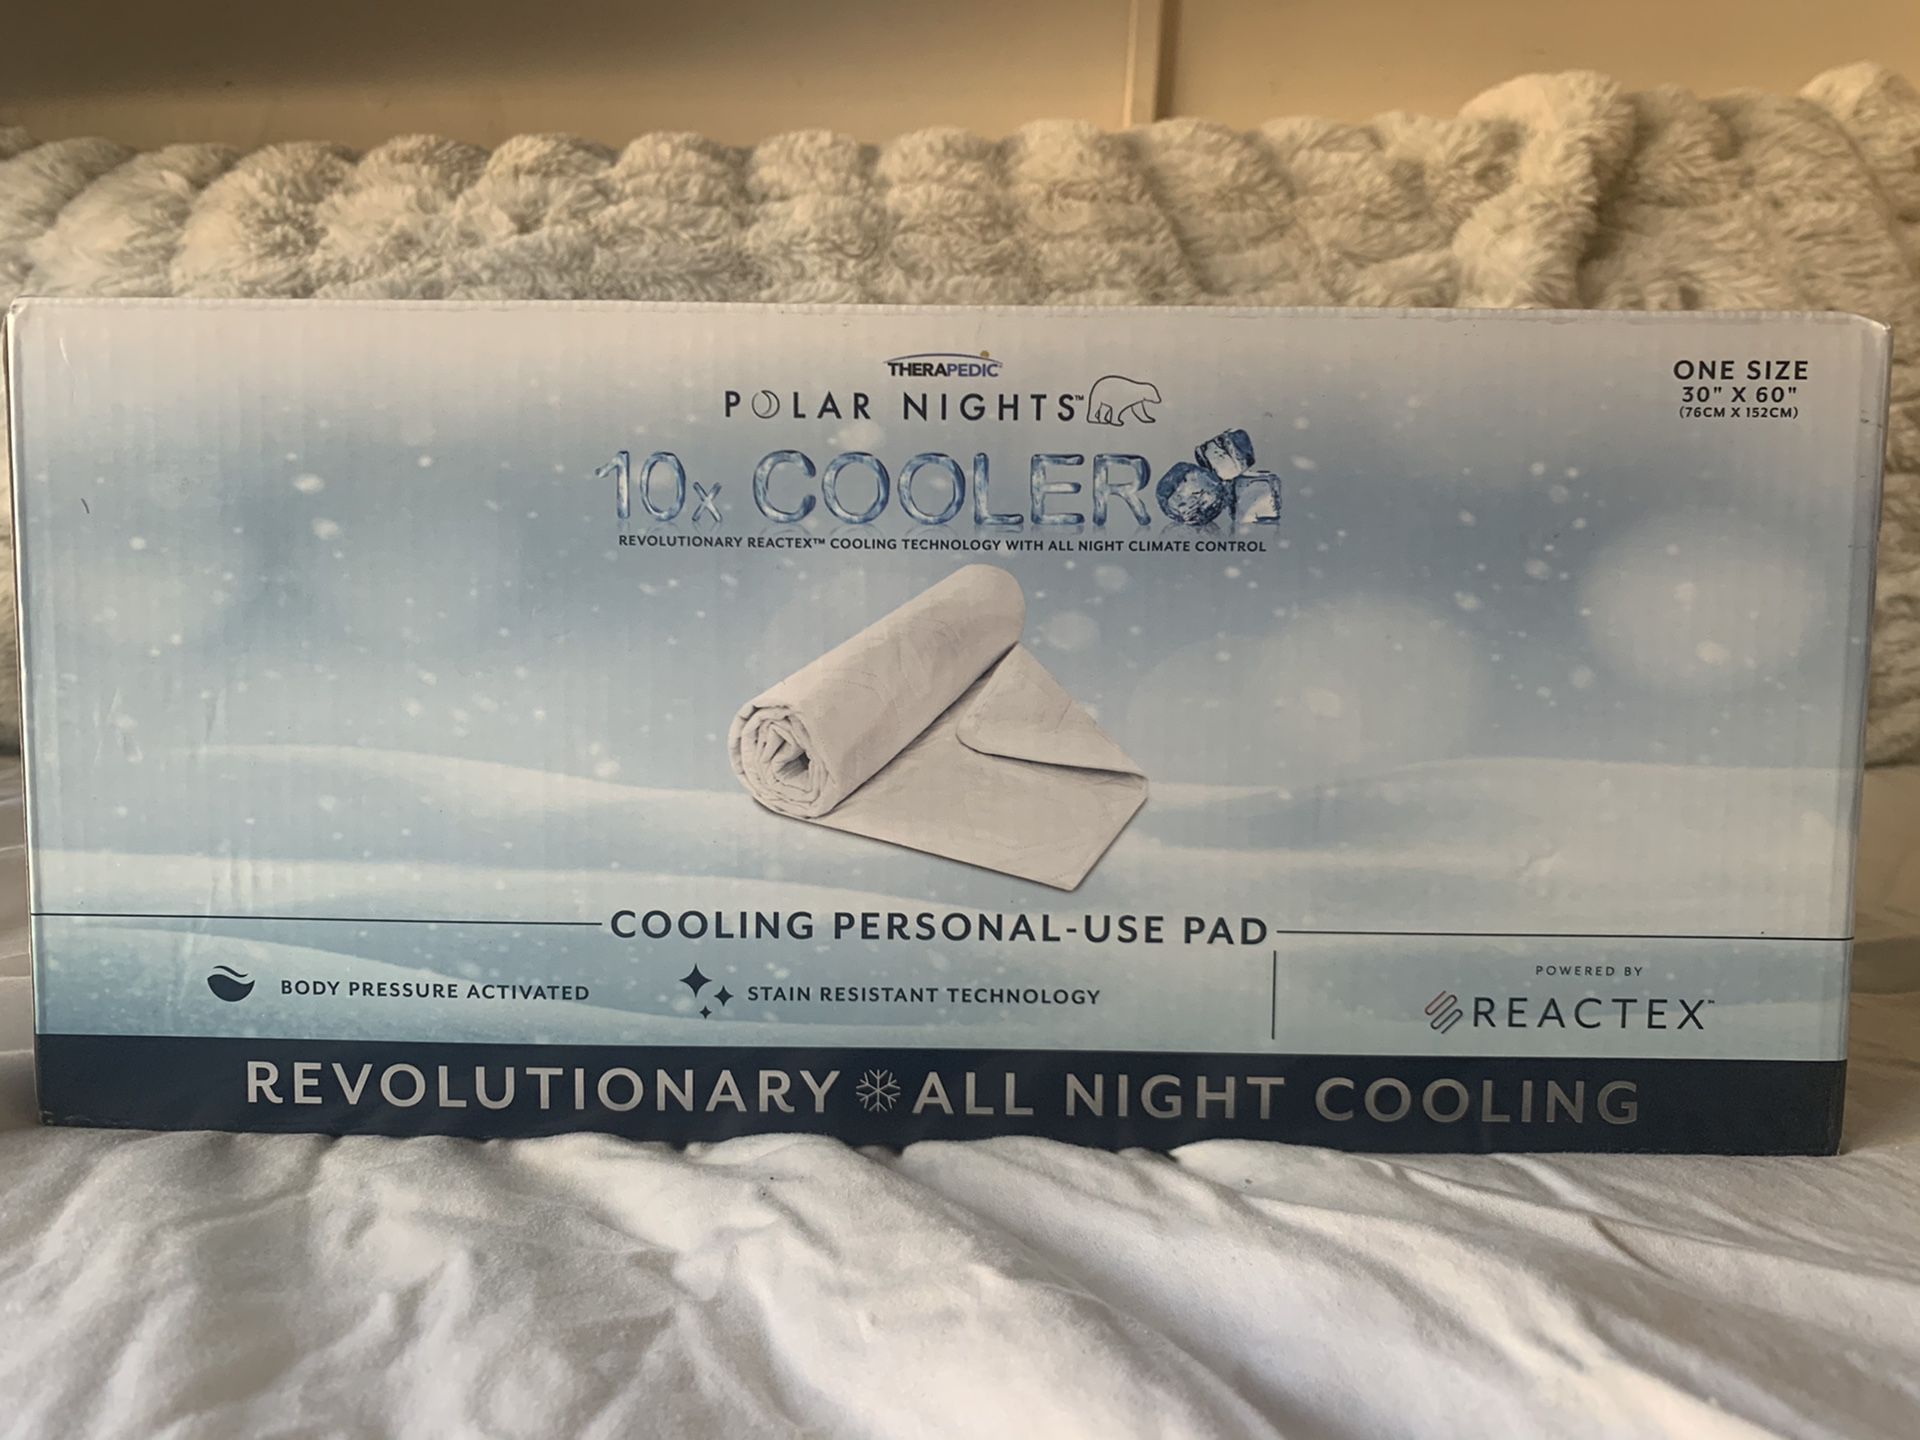 Therapedic Polar Night 10x Cooling Personal Under pad white (30"x60") New